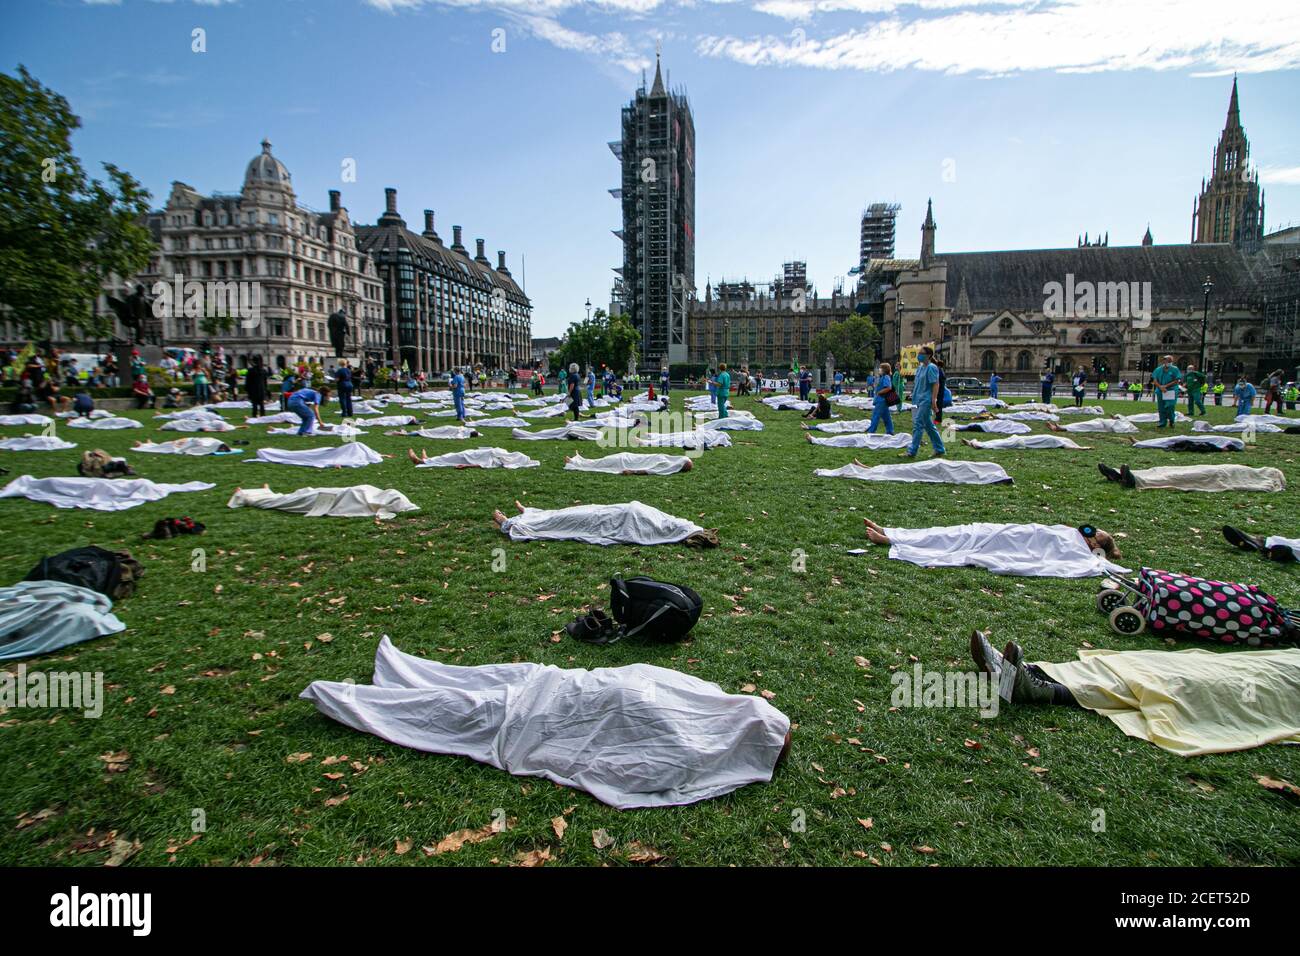 WESTMINSTER LONDON, UK - 2 September 2020 Climate activists from Extinction rebellion lying as a dead body under a white shroud  in Parliament Square.Extinction Rebellion have vowed  to continue protests over 12 days in London  due to the government’s failure to act on the climate and ecological emergency and demand the government act now  and to support the Climate and Ecological Emergency Bill. Credit: amer ghazzal/Alamy Live News Stock Photo